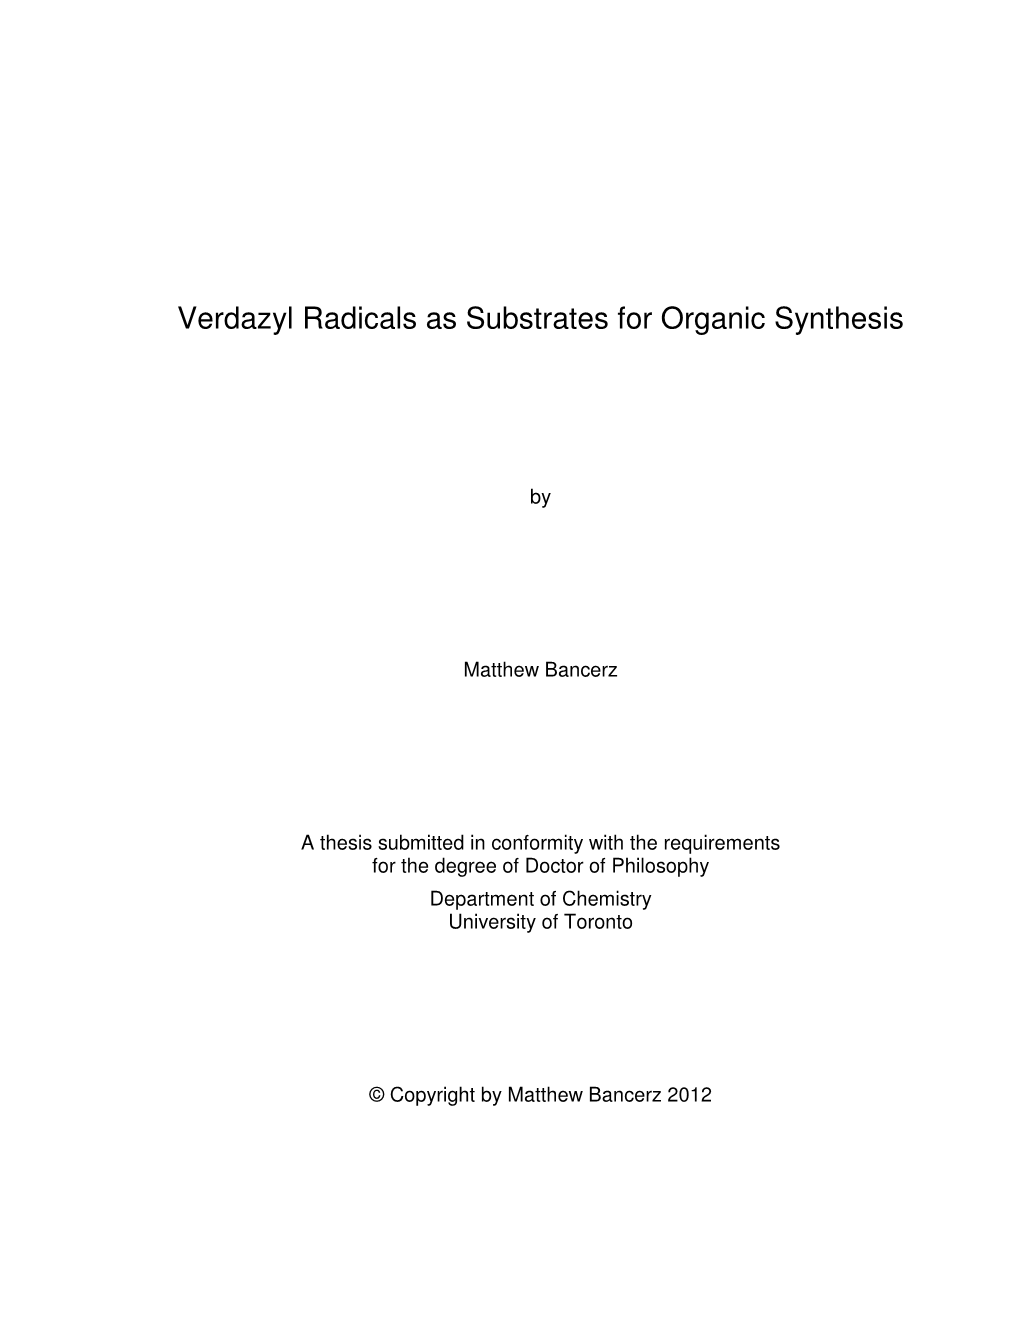 Verdazyl Radicals As Substrates for Organic Synthesis